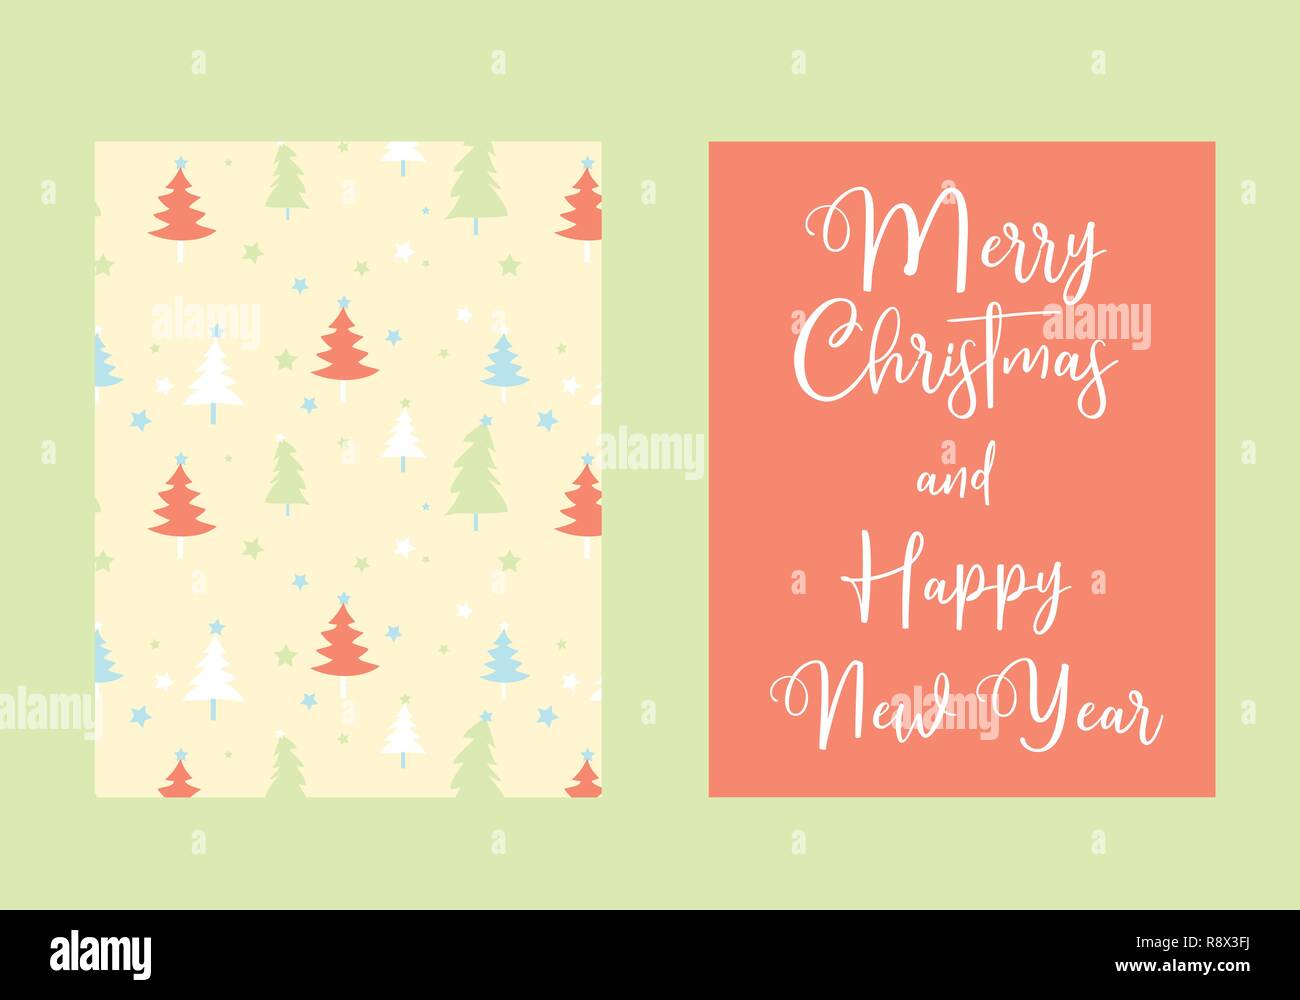 Merry Christmas and Happy New Year vector card, Christmas three pattern background pastel colors Stock Vector